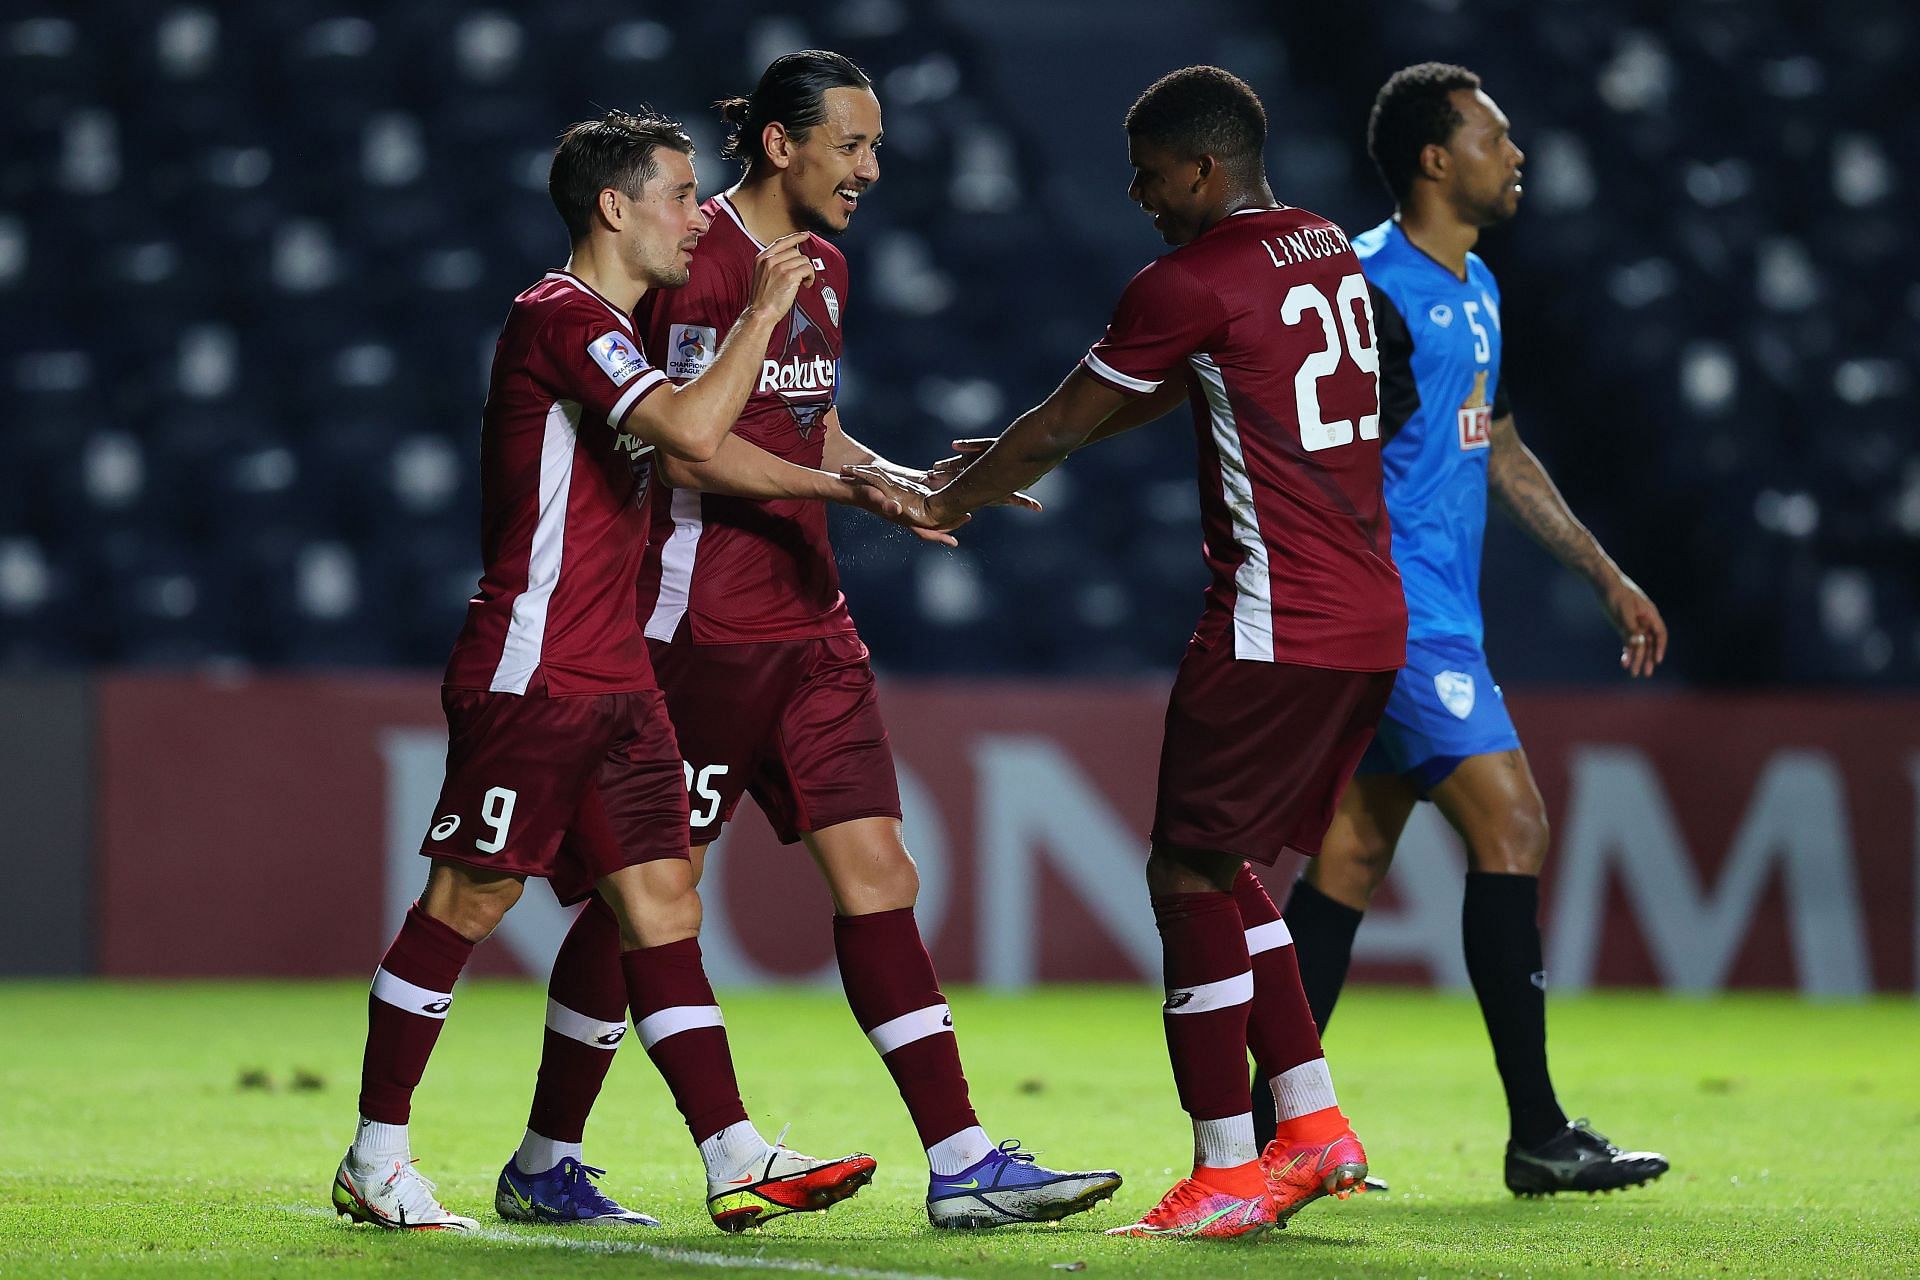 Vissel Kobe will face Chiangrai United on Monday - AFC Champions League Group J